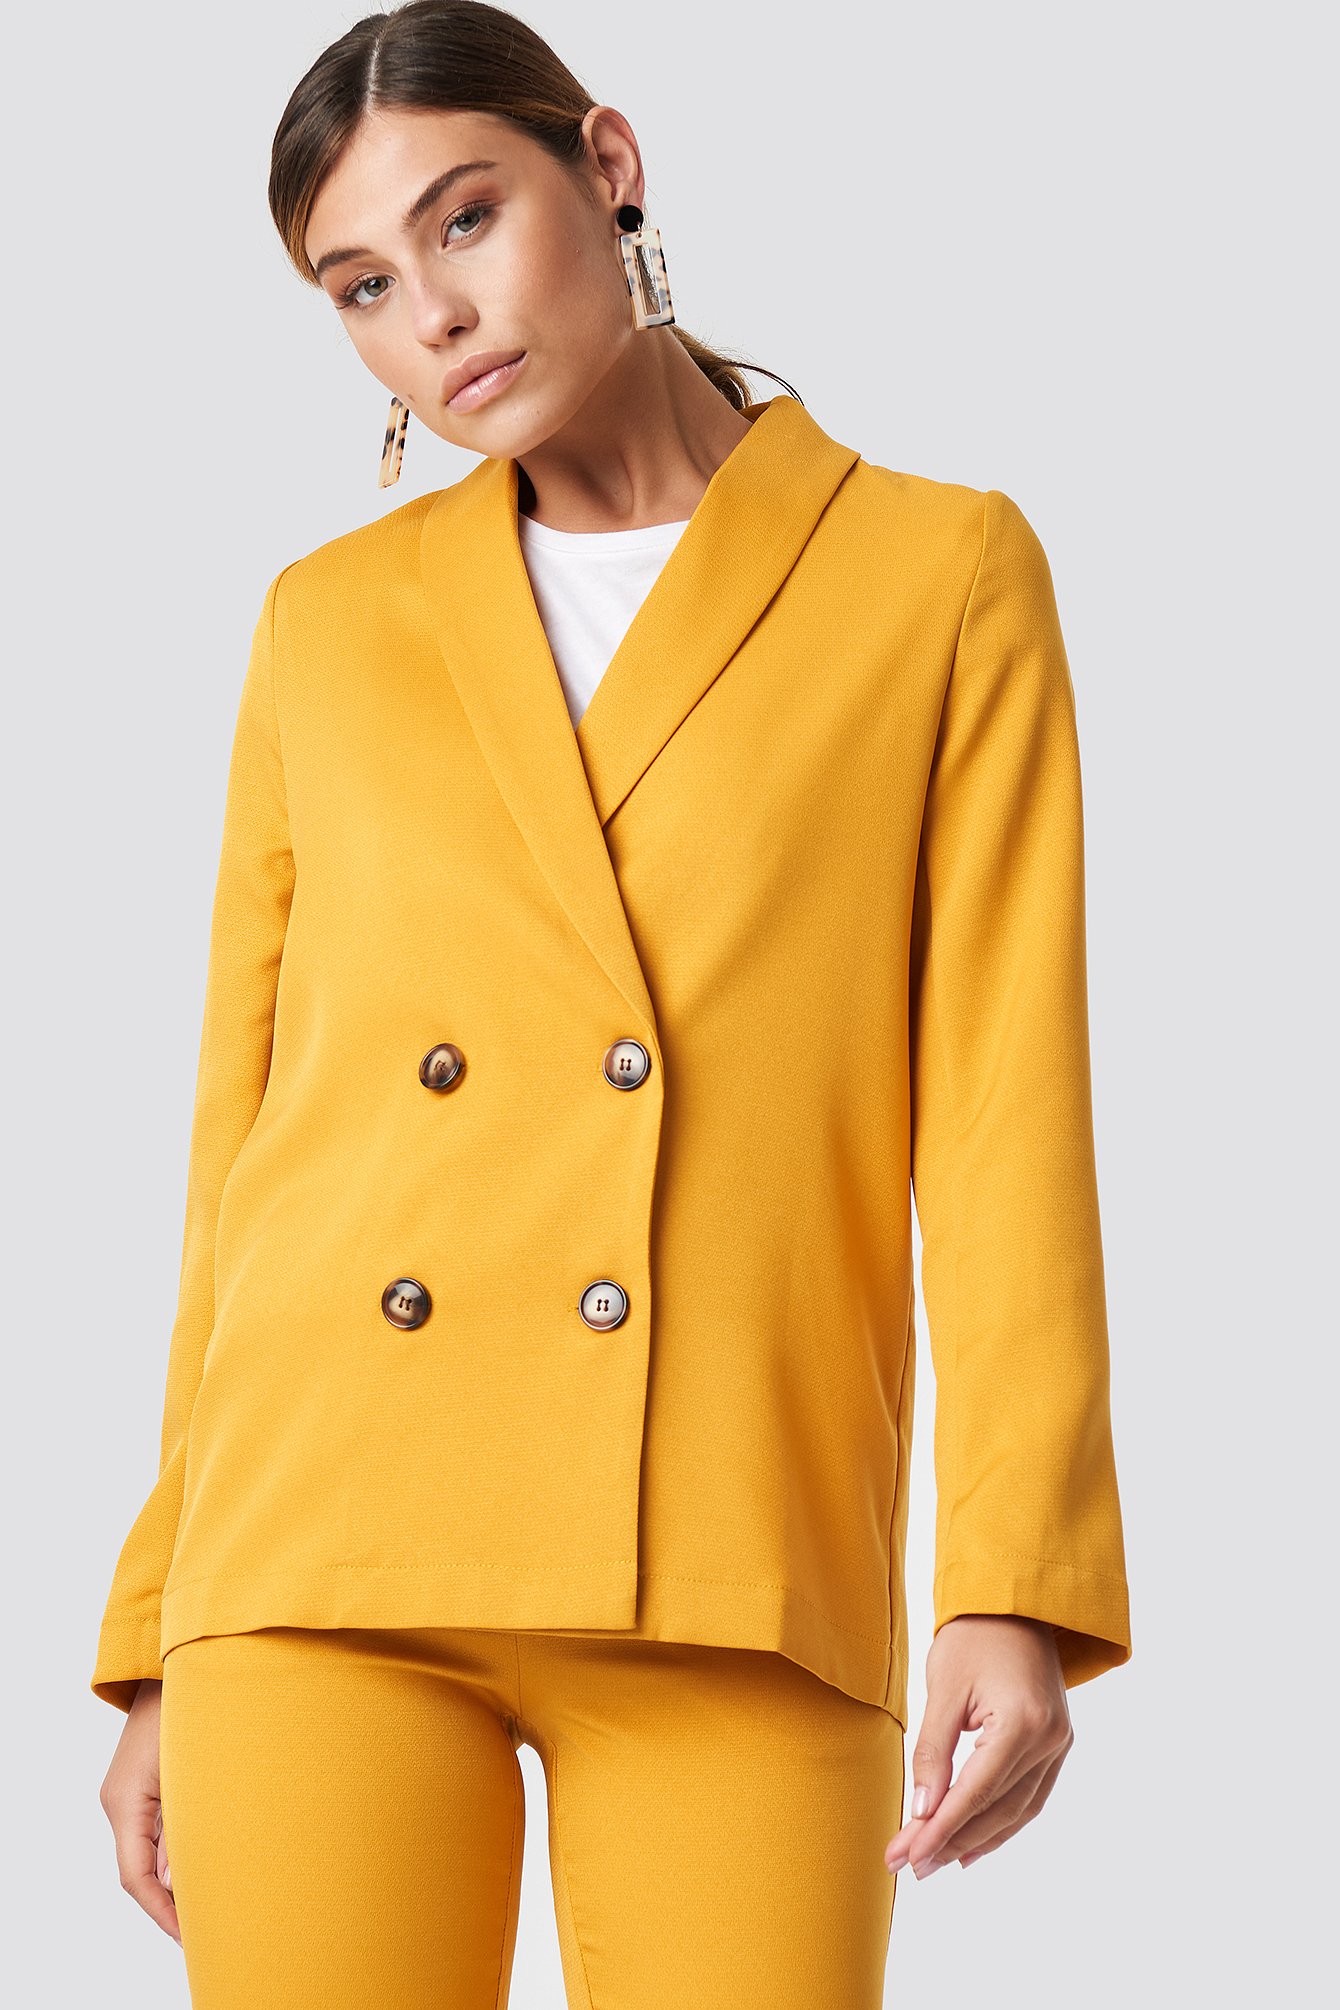 Mustard Yellow NA-KD Classic Oversized Double Breasted Blazer